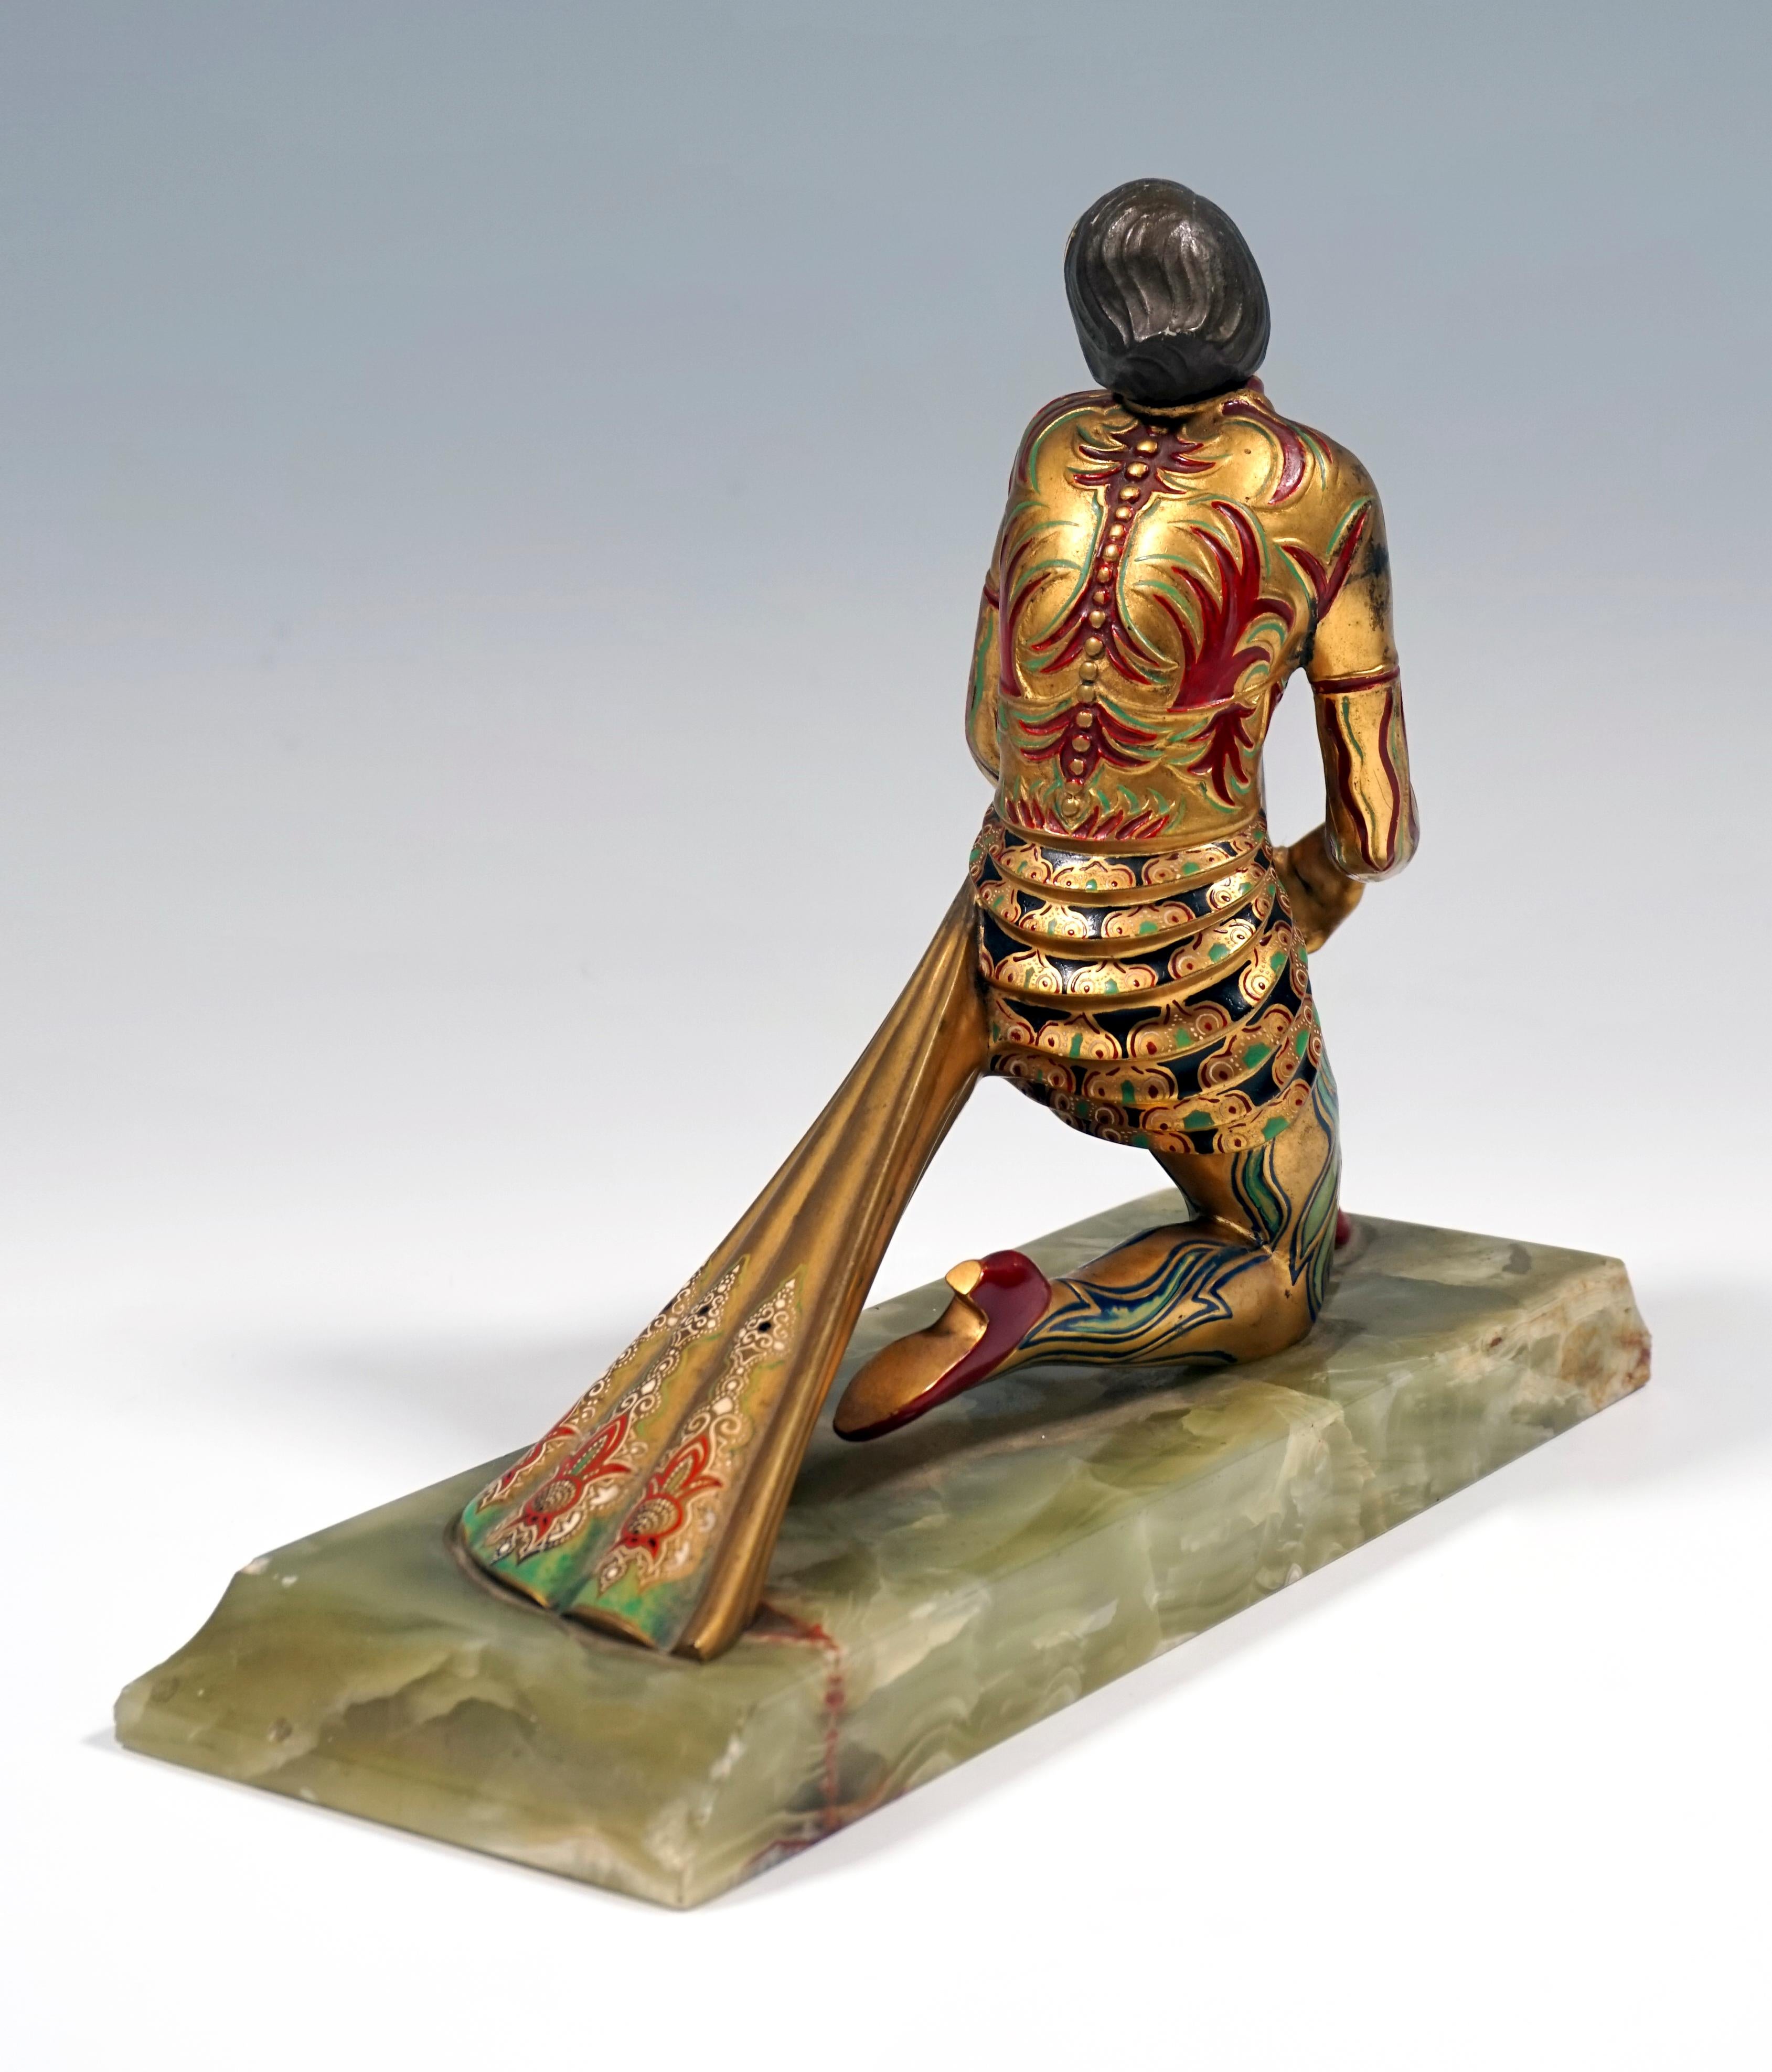 Hand-Crafted Viennese Bronze 'Fancy Dancer' On Onyx Base as a Bookend, by Gerdago, ca 1925 For Sale